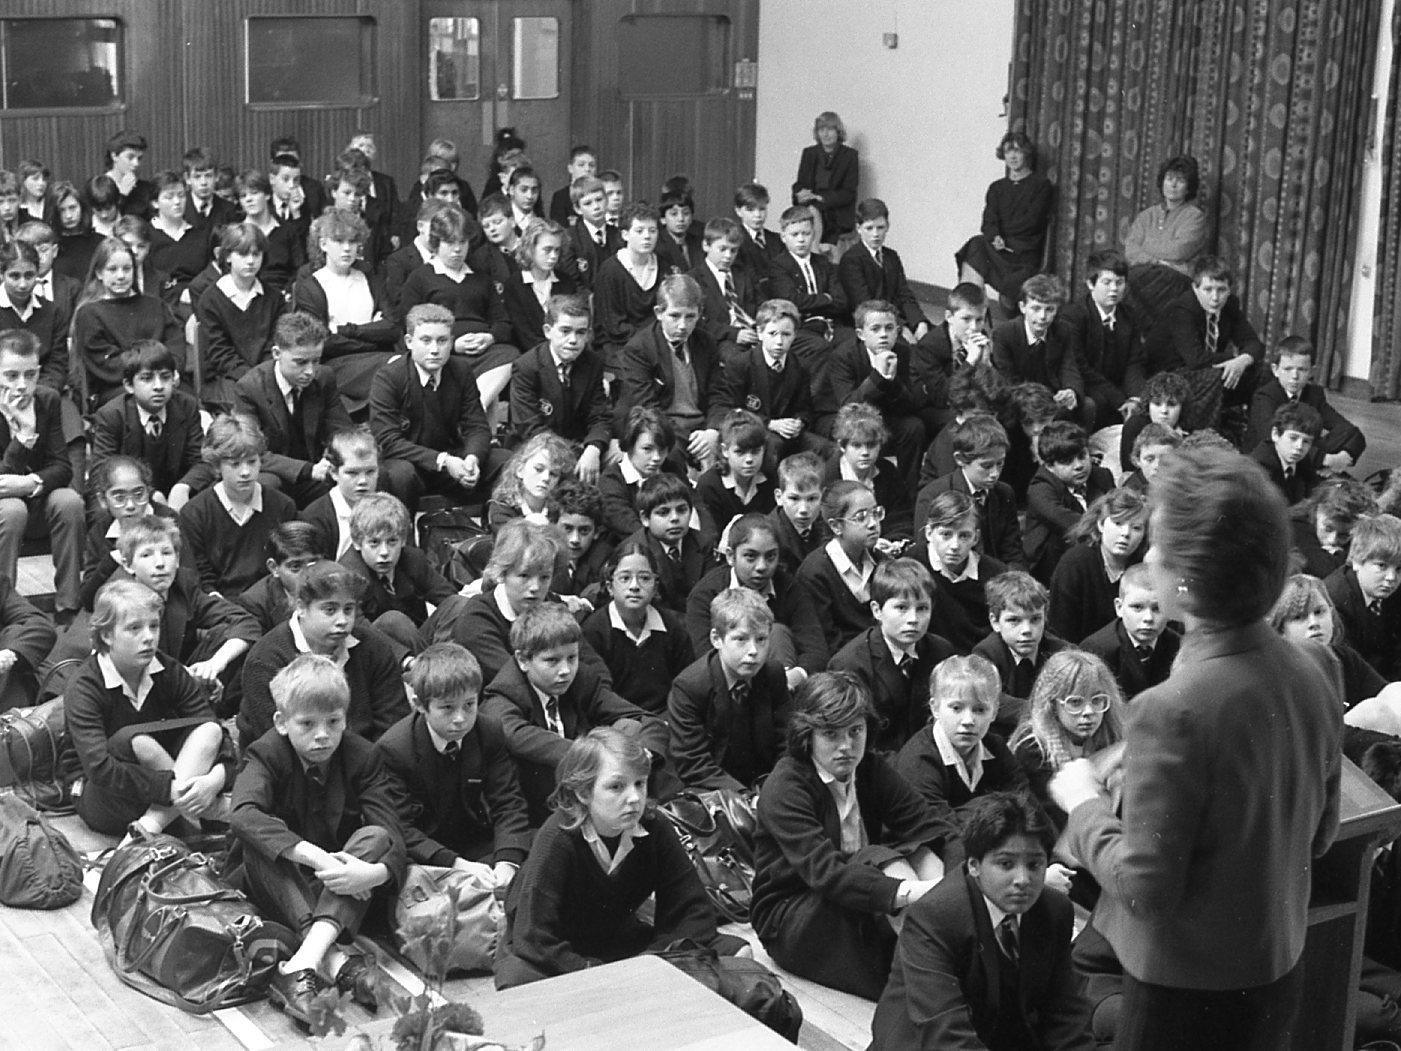 Multi-racial schools in Lancashire face possible religious splits when new education laws are enforced in the county, head teachers warned. Scenes like this traditional Christian morning assembly at Ashton-on-Ribble High School could see some children opted out on religious grounds